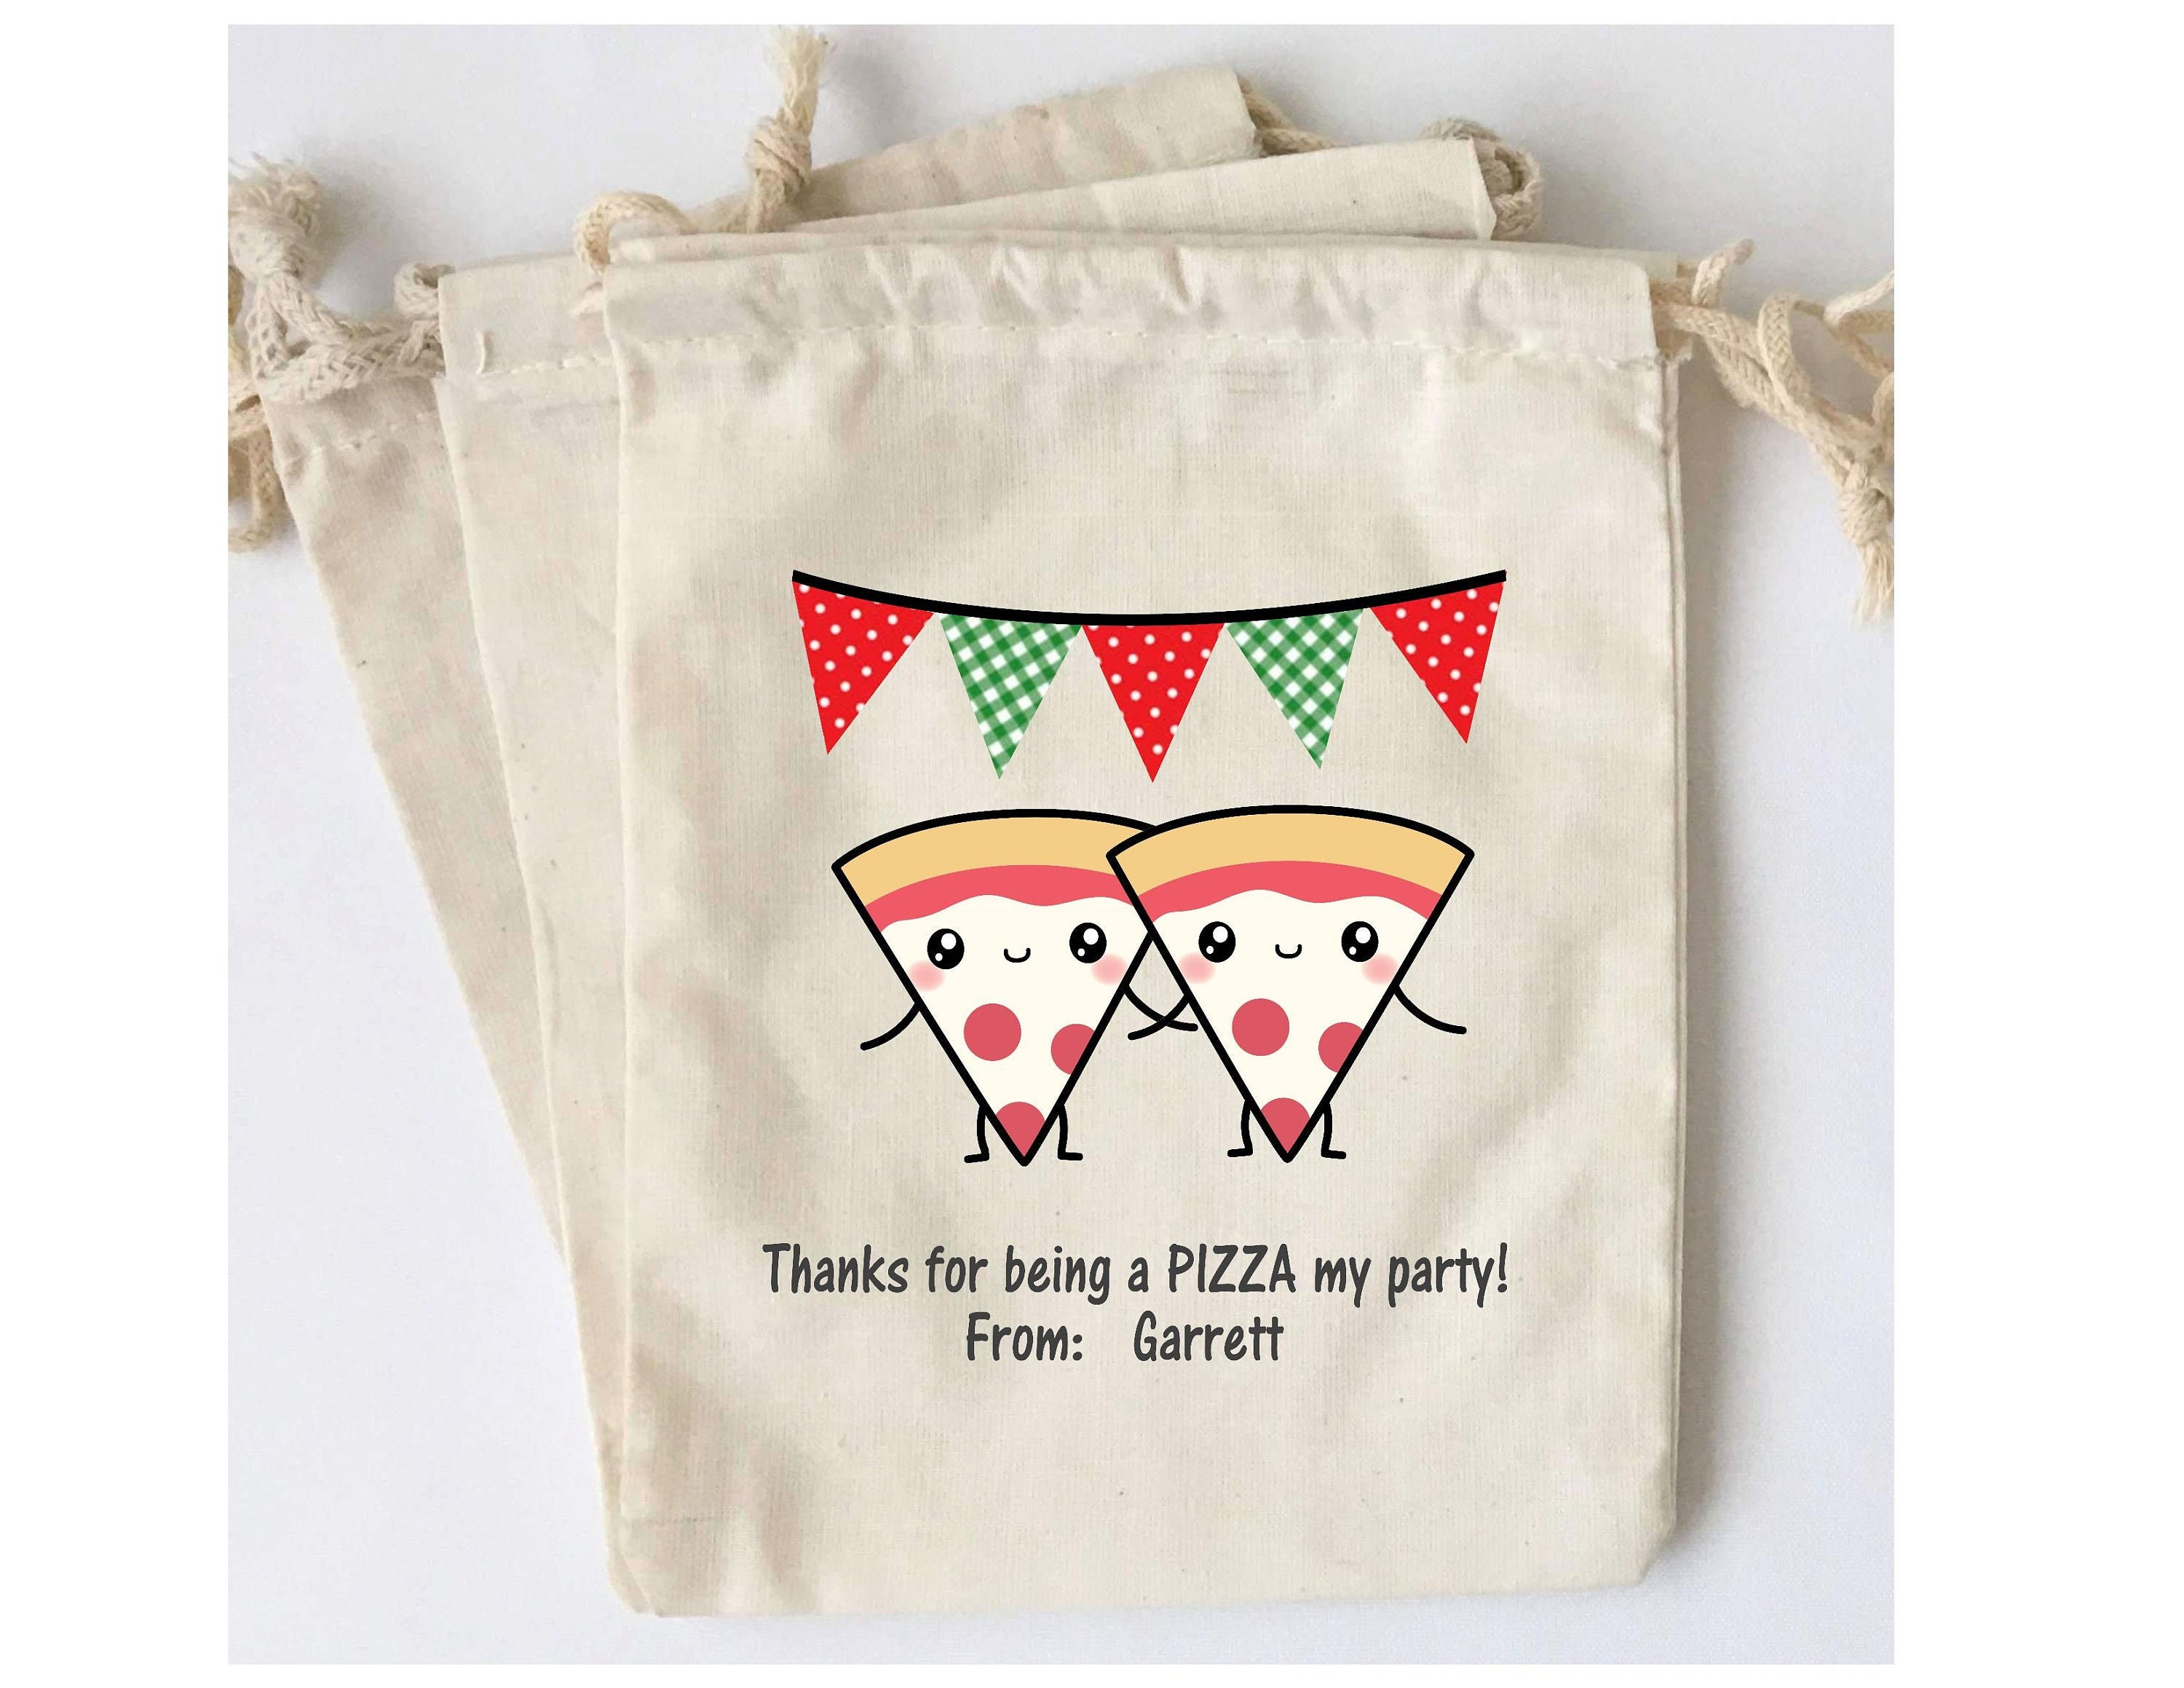 LEMLO 12pcs Pizza Tower Party Favor Gift Bags Goodie Bags, Pizza